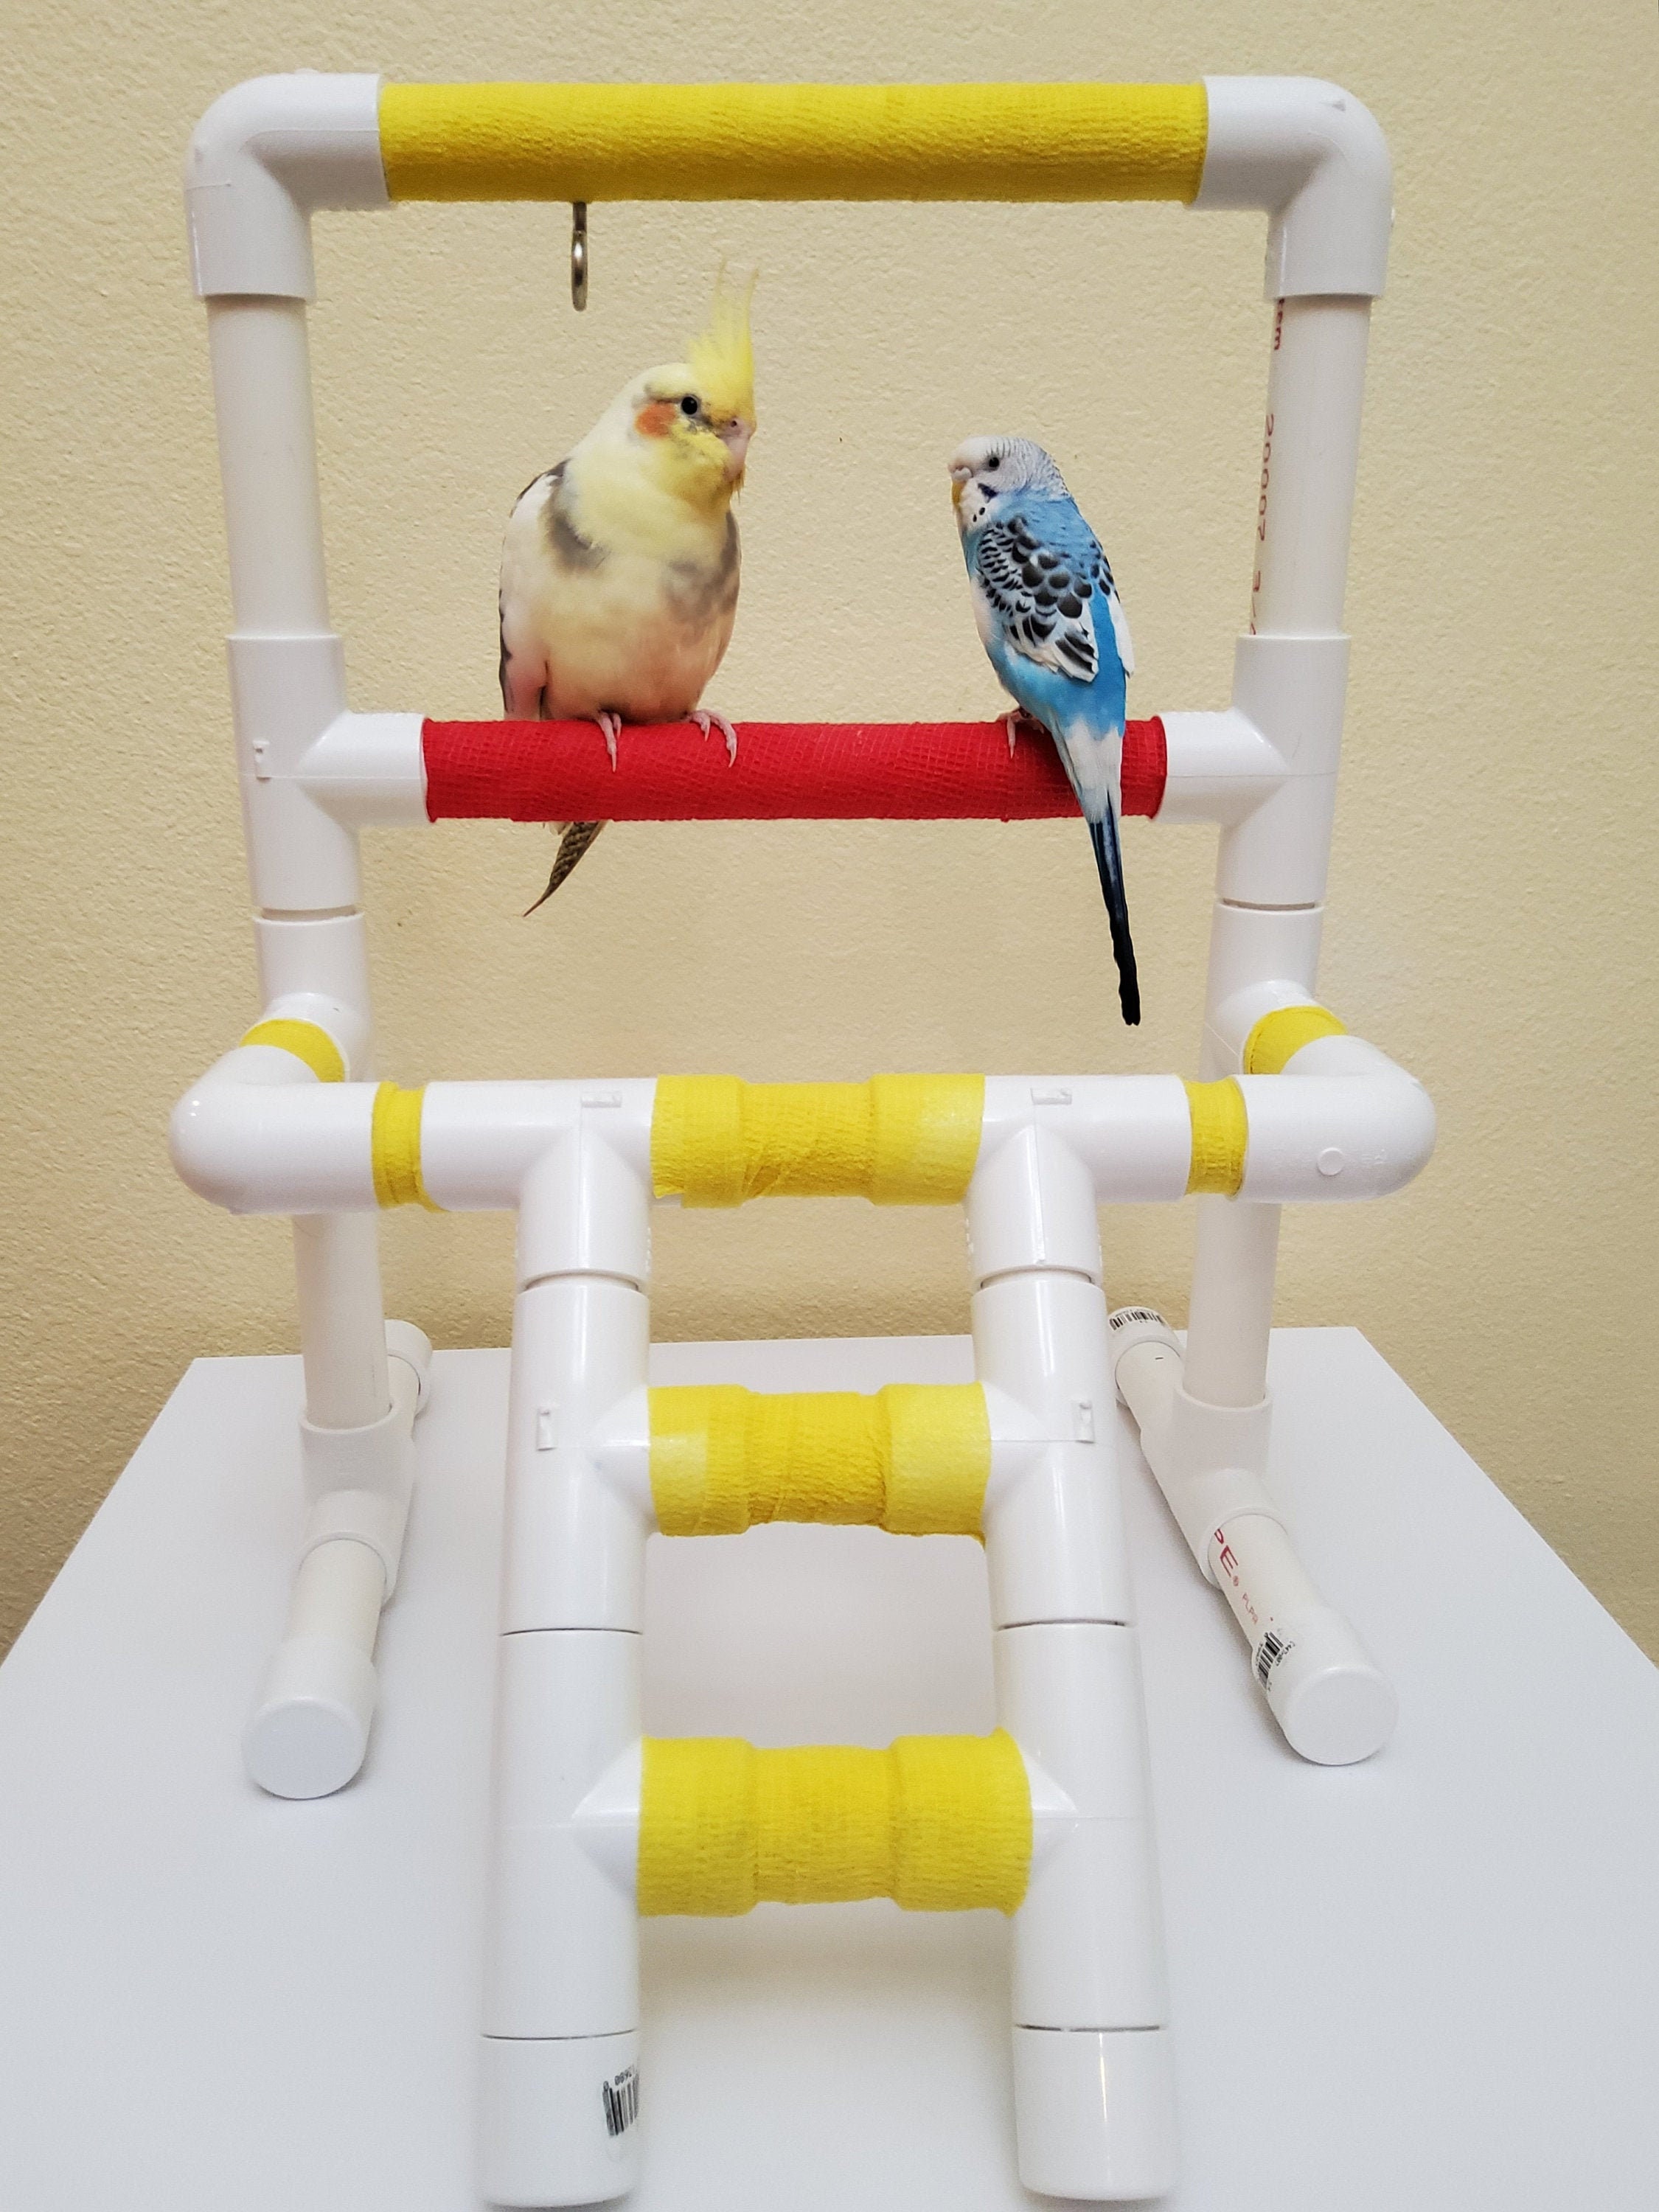 Bird Perch Stand Parrot Rope Swing Hanging Toy,Circle Ring Parakeet Perch Swing Toys&Bird Platform Parrot Stand Playground for Budgie Conure Finches Lovebird Cockatiel Cockatoo Exercise Toys 